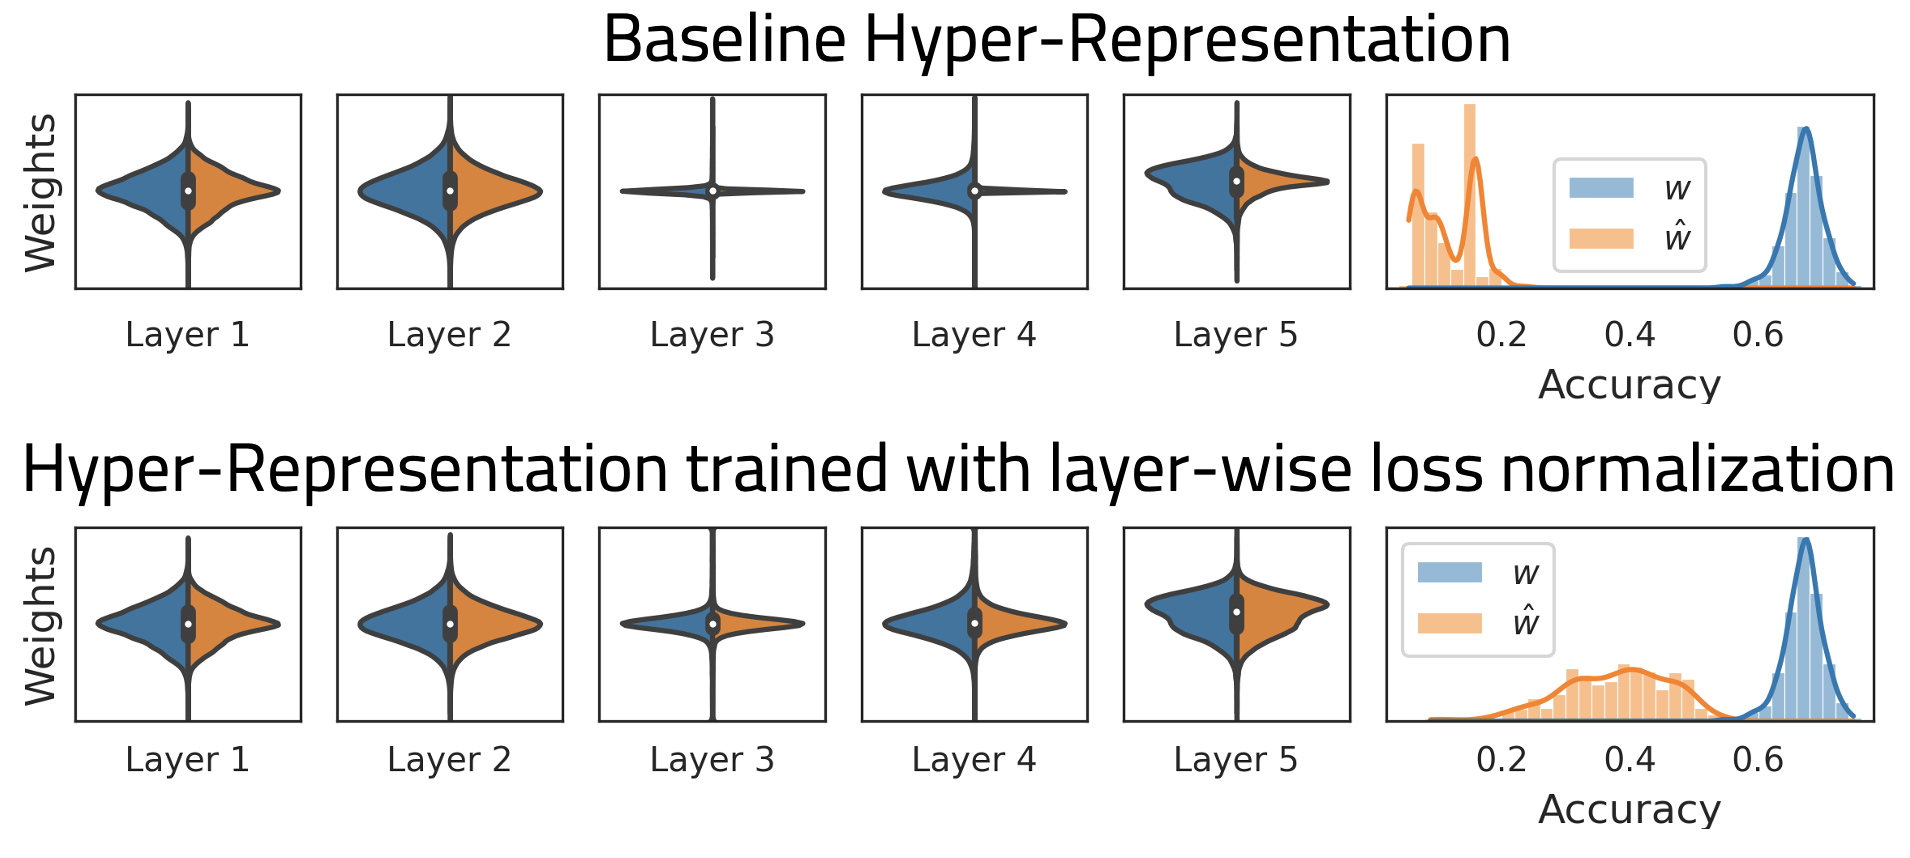 Top: baseline hyper-representation. Weight distributions of original and reconstructed weights do not match, consequently the reconstrcuted models have very low accuracy. Bottom: Hyper-representation trained with layer-wise loss norm. Reconstructed weight distributions match the original and have drastically improved accuracy.
